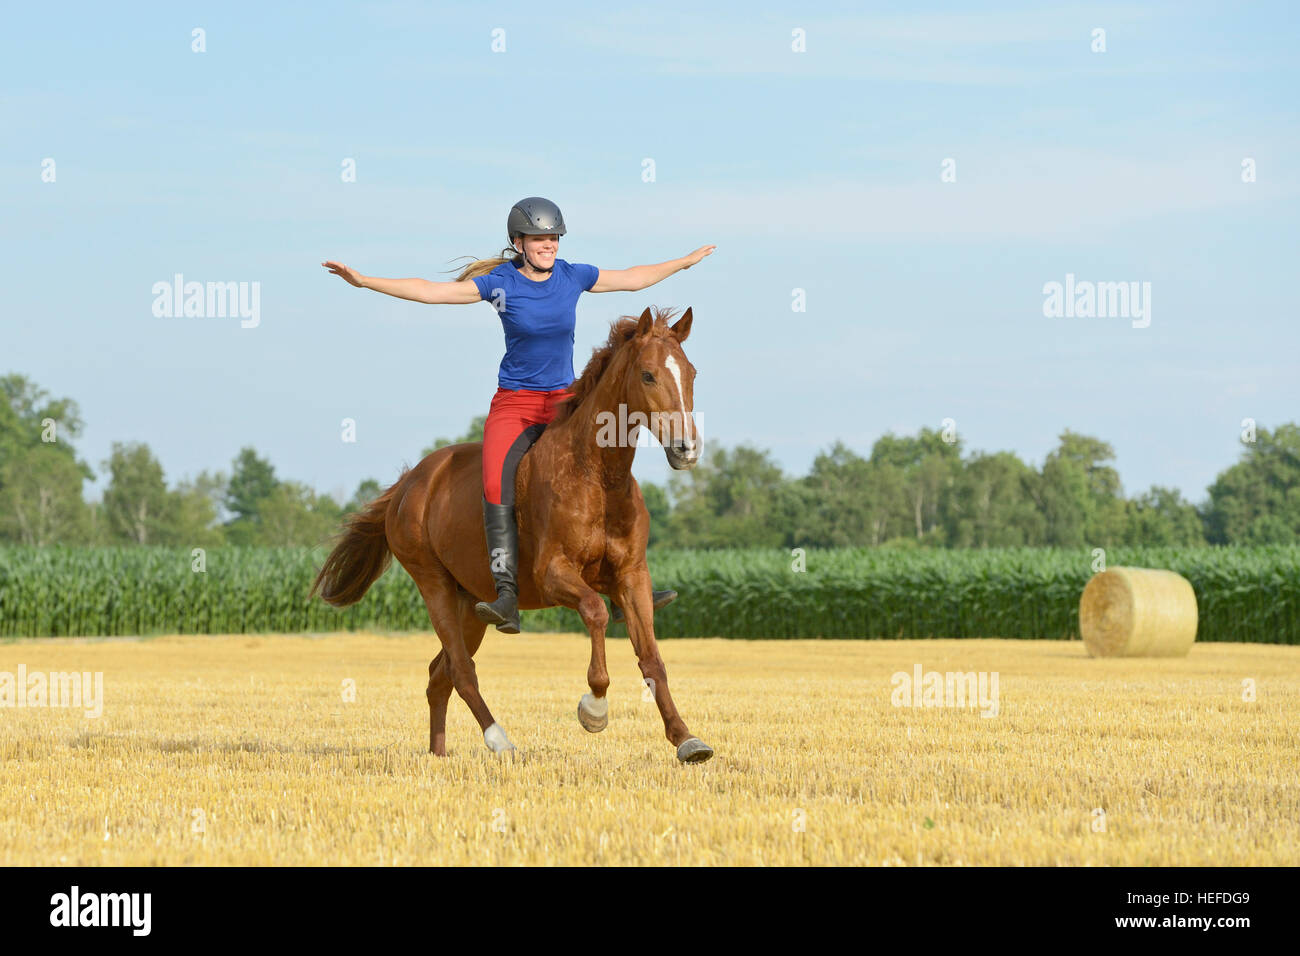 Rider riding canter bareback and freehand on a 19-year-old Trakehnen horse in a stubble field Stock Photo